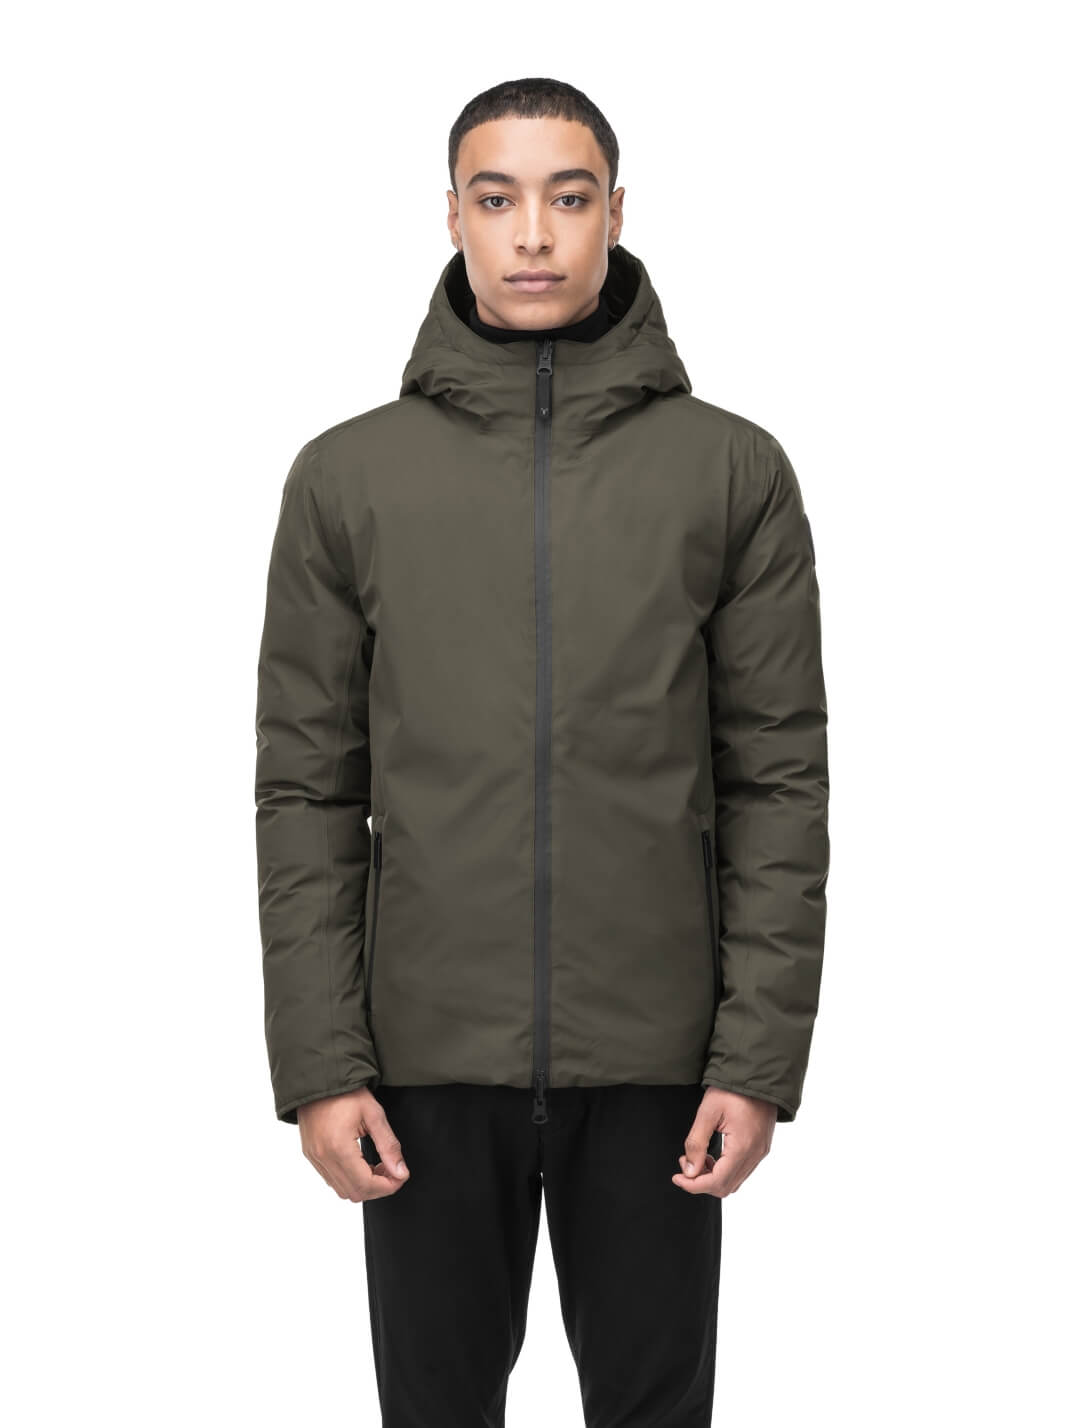 Chris Men's Mid Weight Reversible Puffer Jacket in hip length, Canadian duck down insulation, non-removable adjustable hood, ribbed cuffs, and quilted body on reversible side, in Fatigue